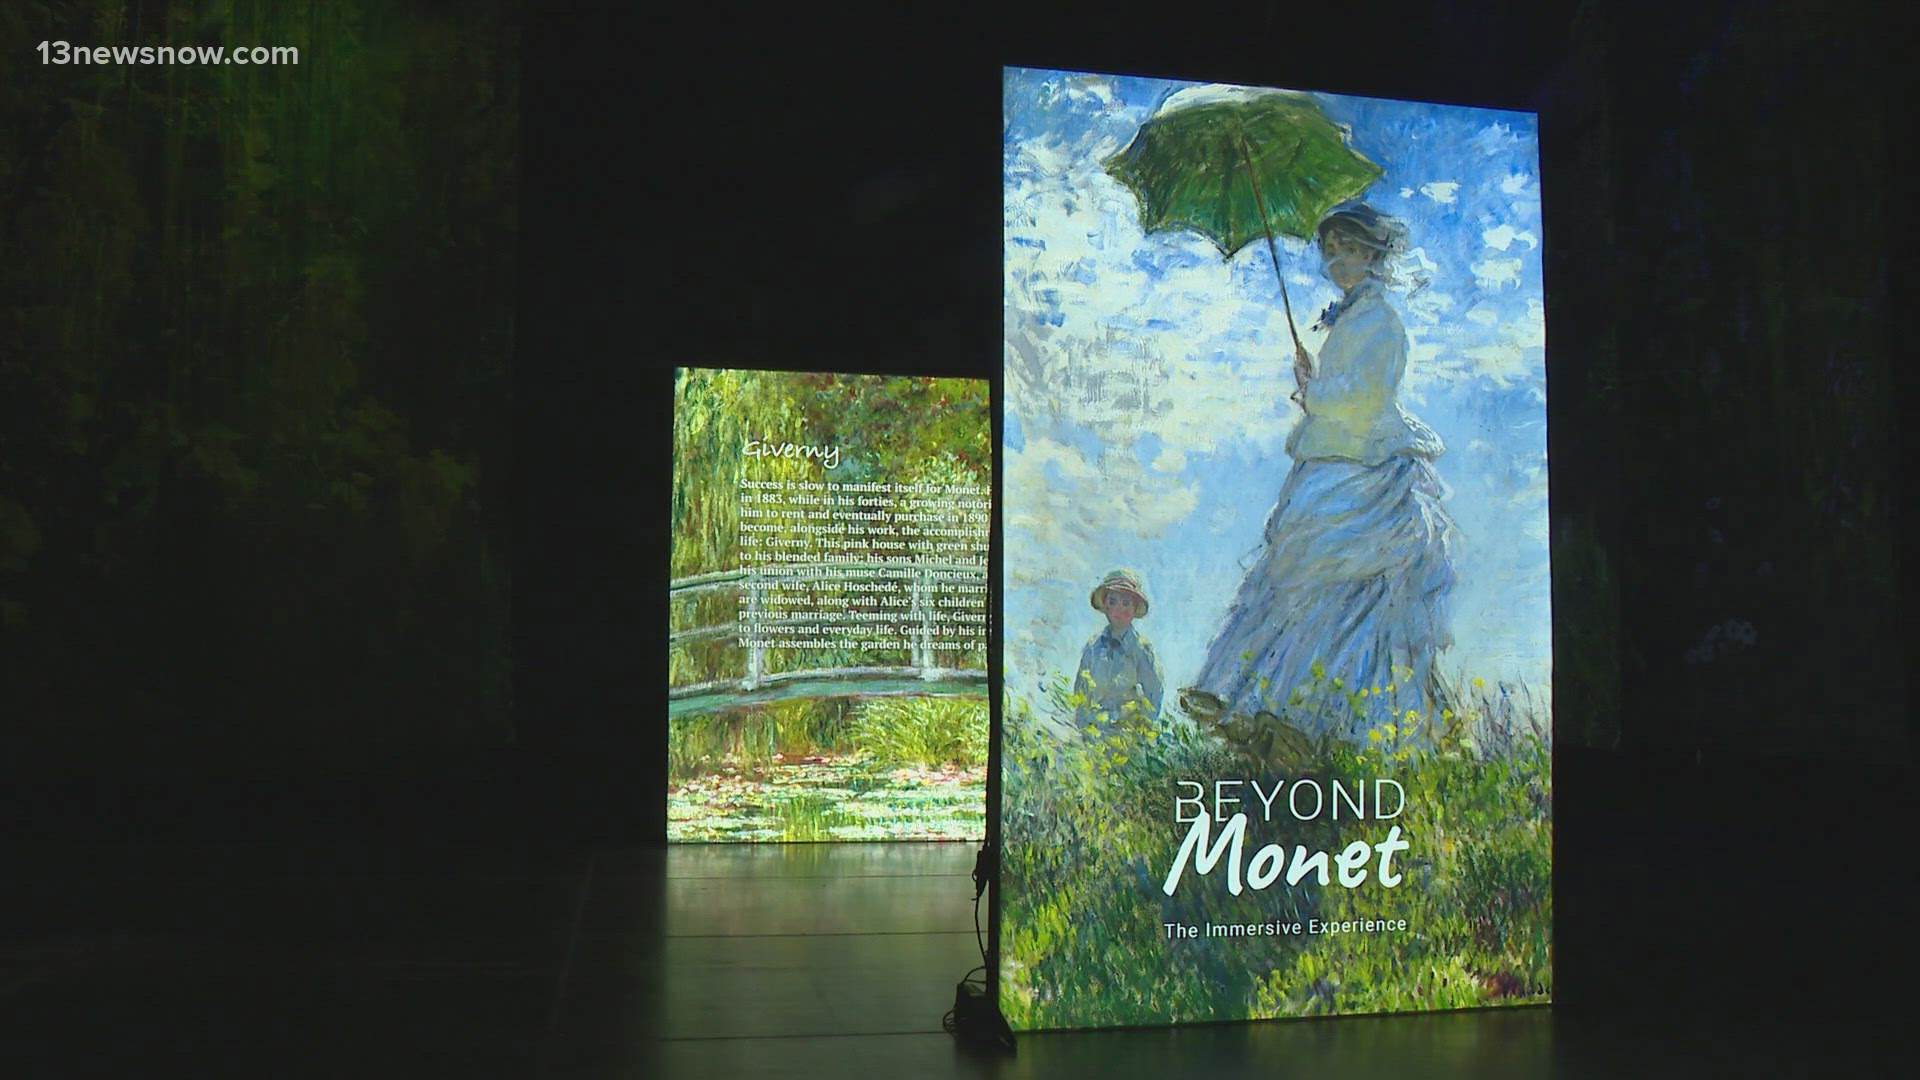 Now turning from the light shows in the sky to a colorful and unique showing featuring art from the famous French painter Claude Monet.